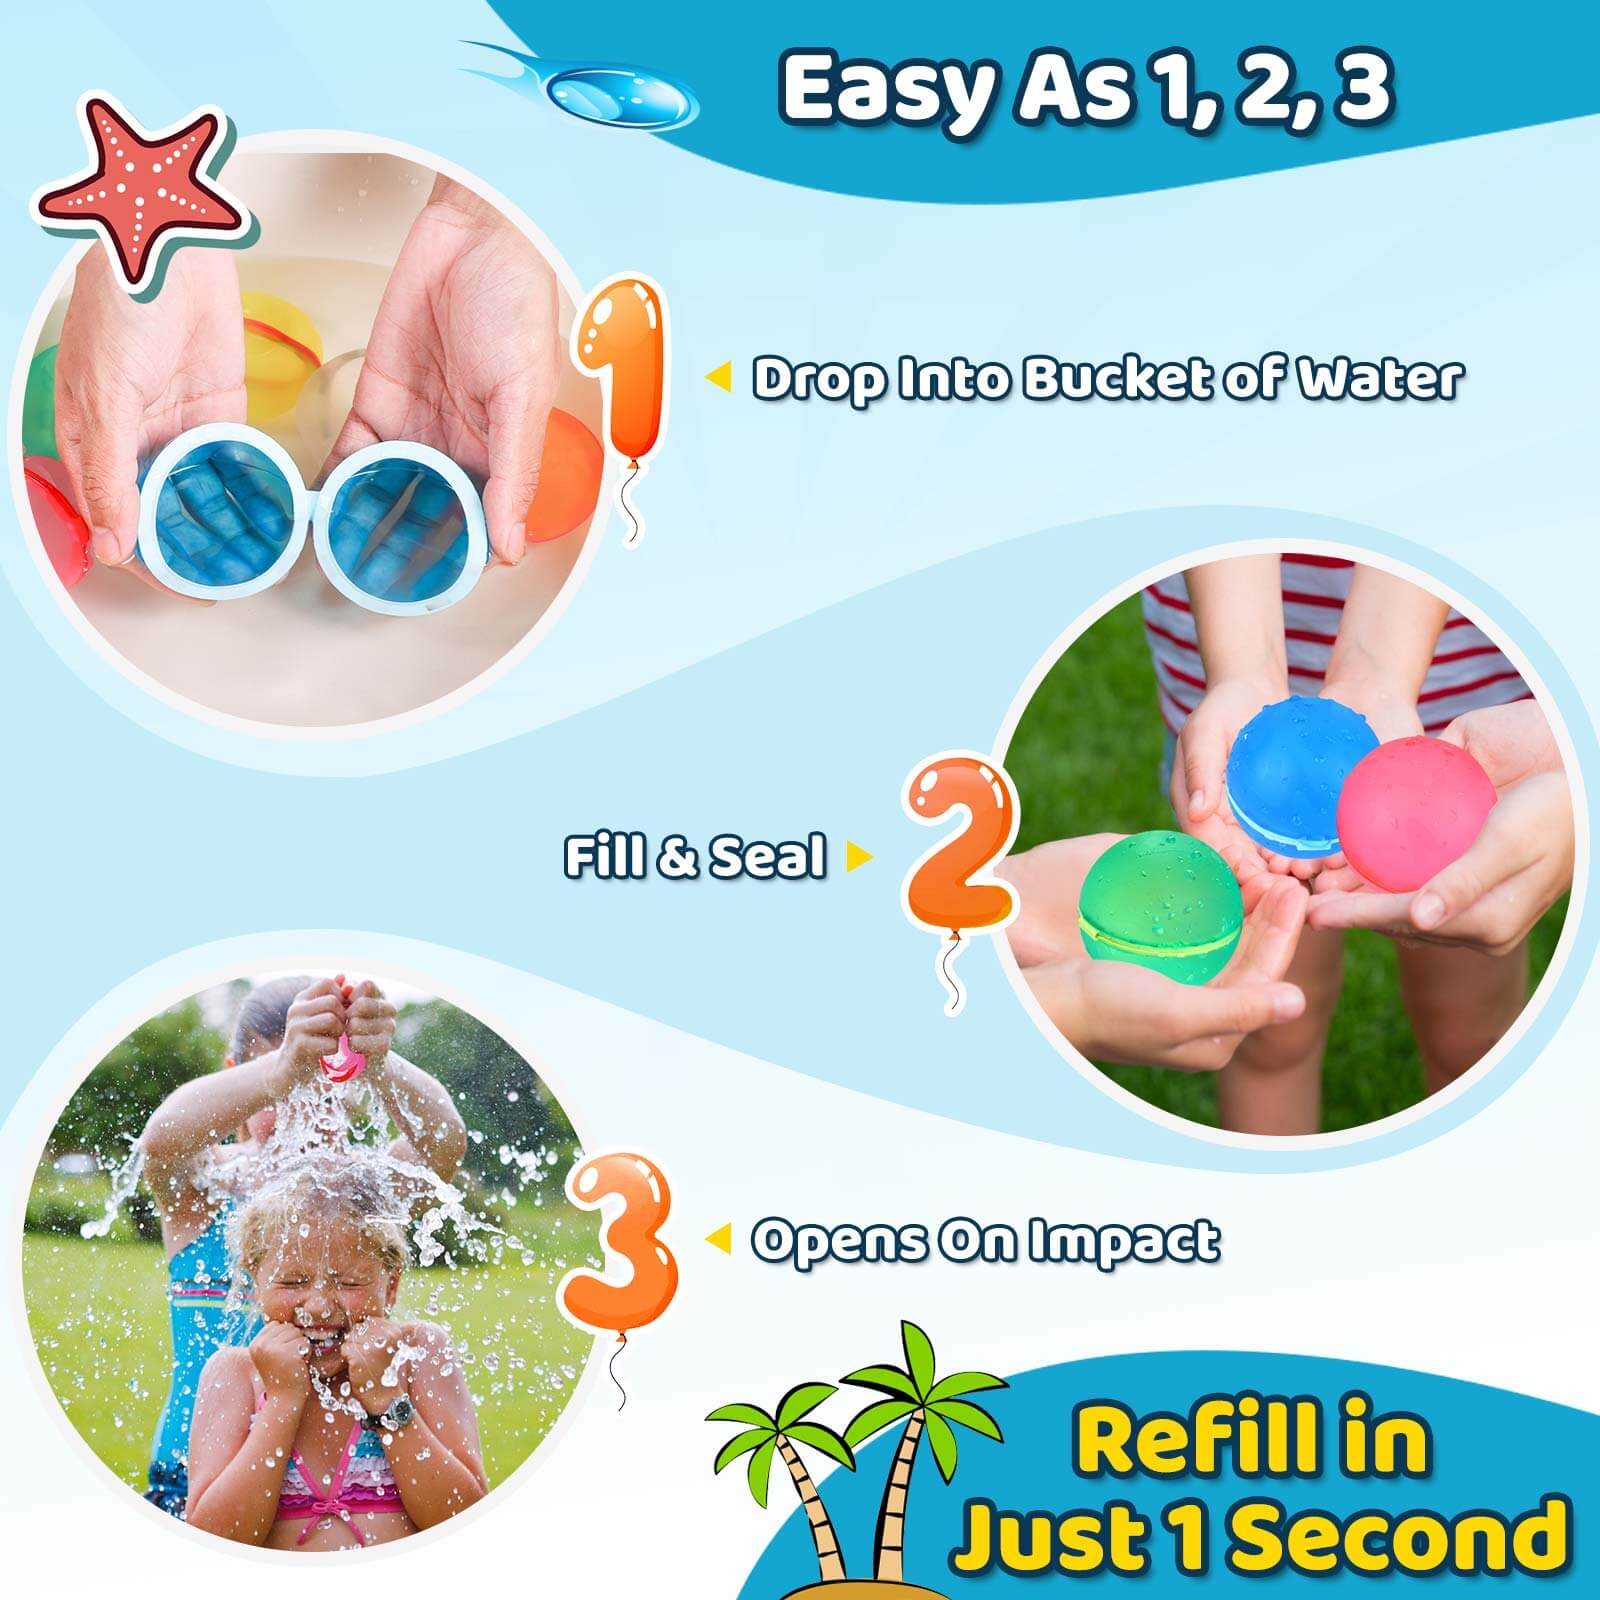 Magnetic Reusable Water Balloons Outdoor Water Summer Fun Toys Birthday Gift